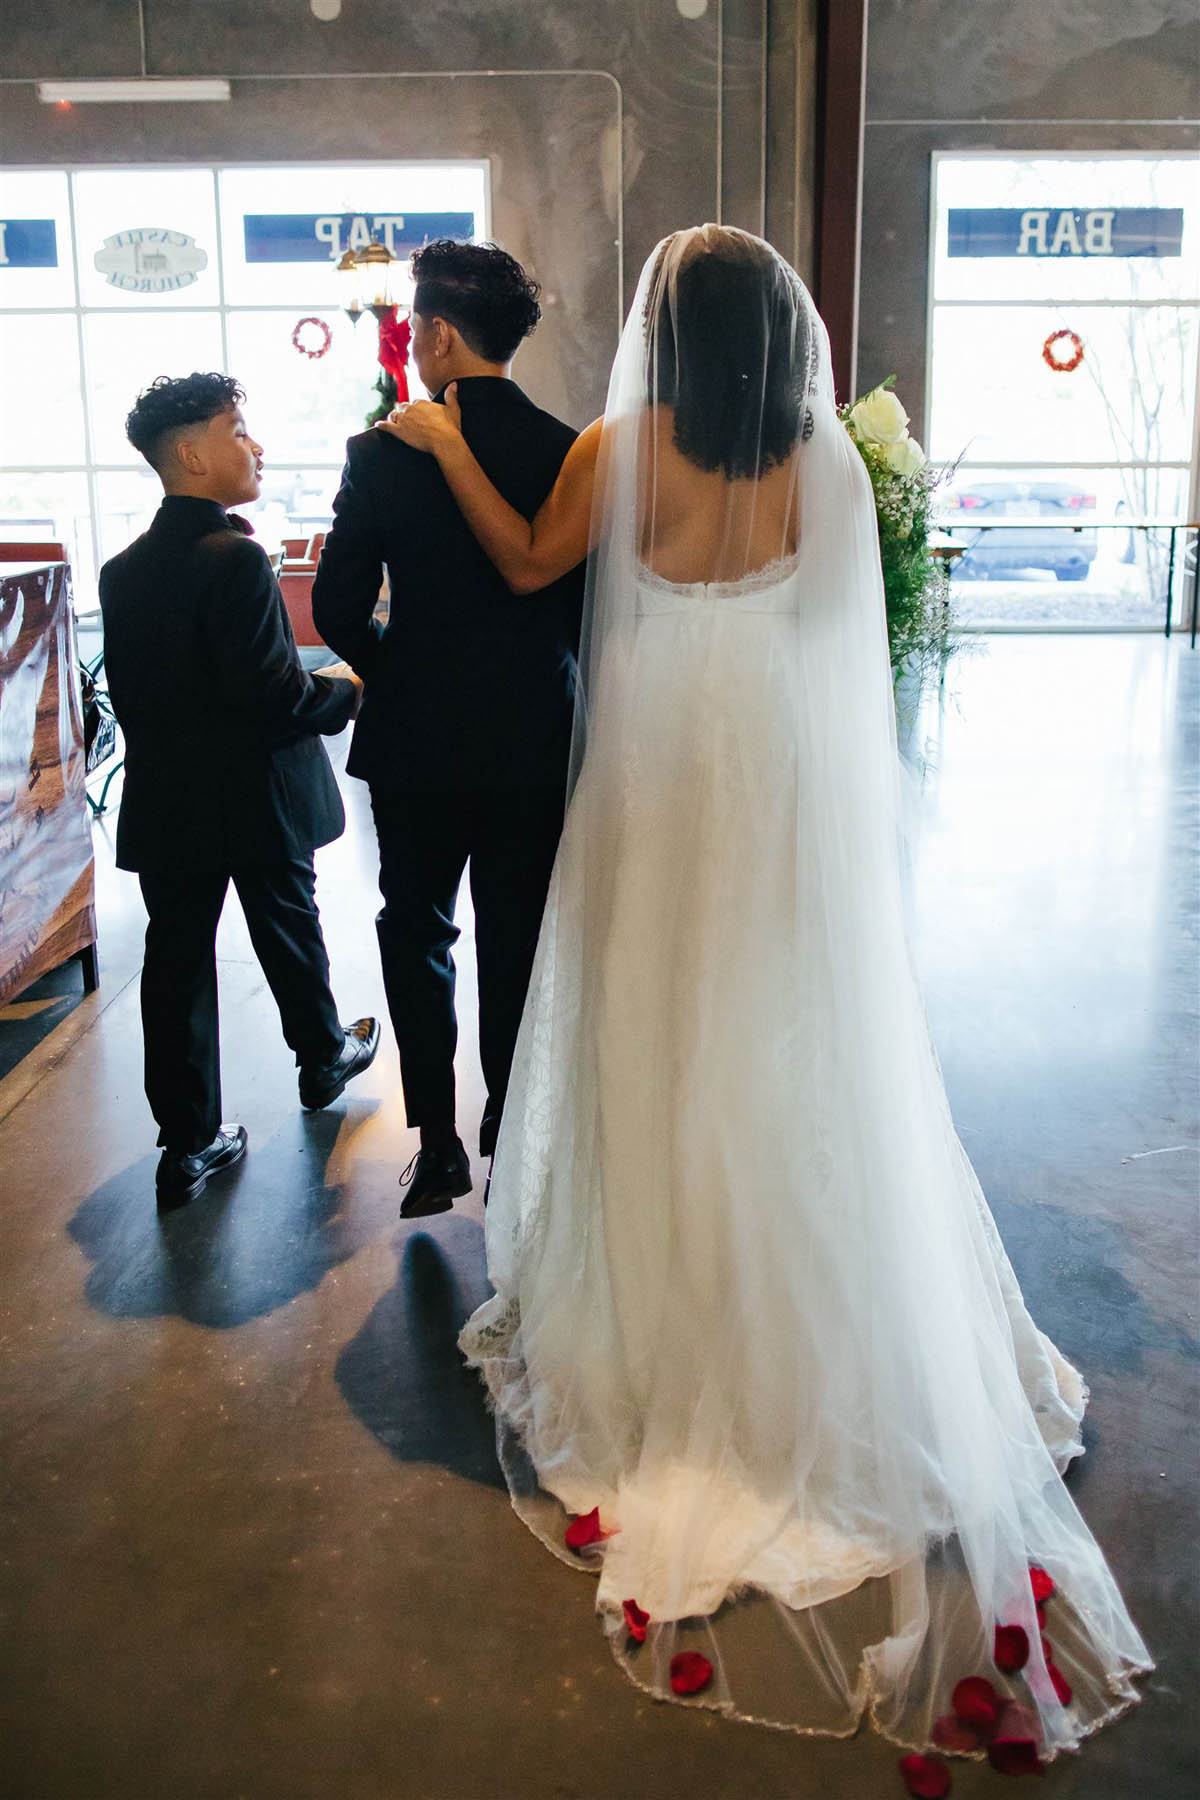 Two brides and their son stand together, walking down an aisle.